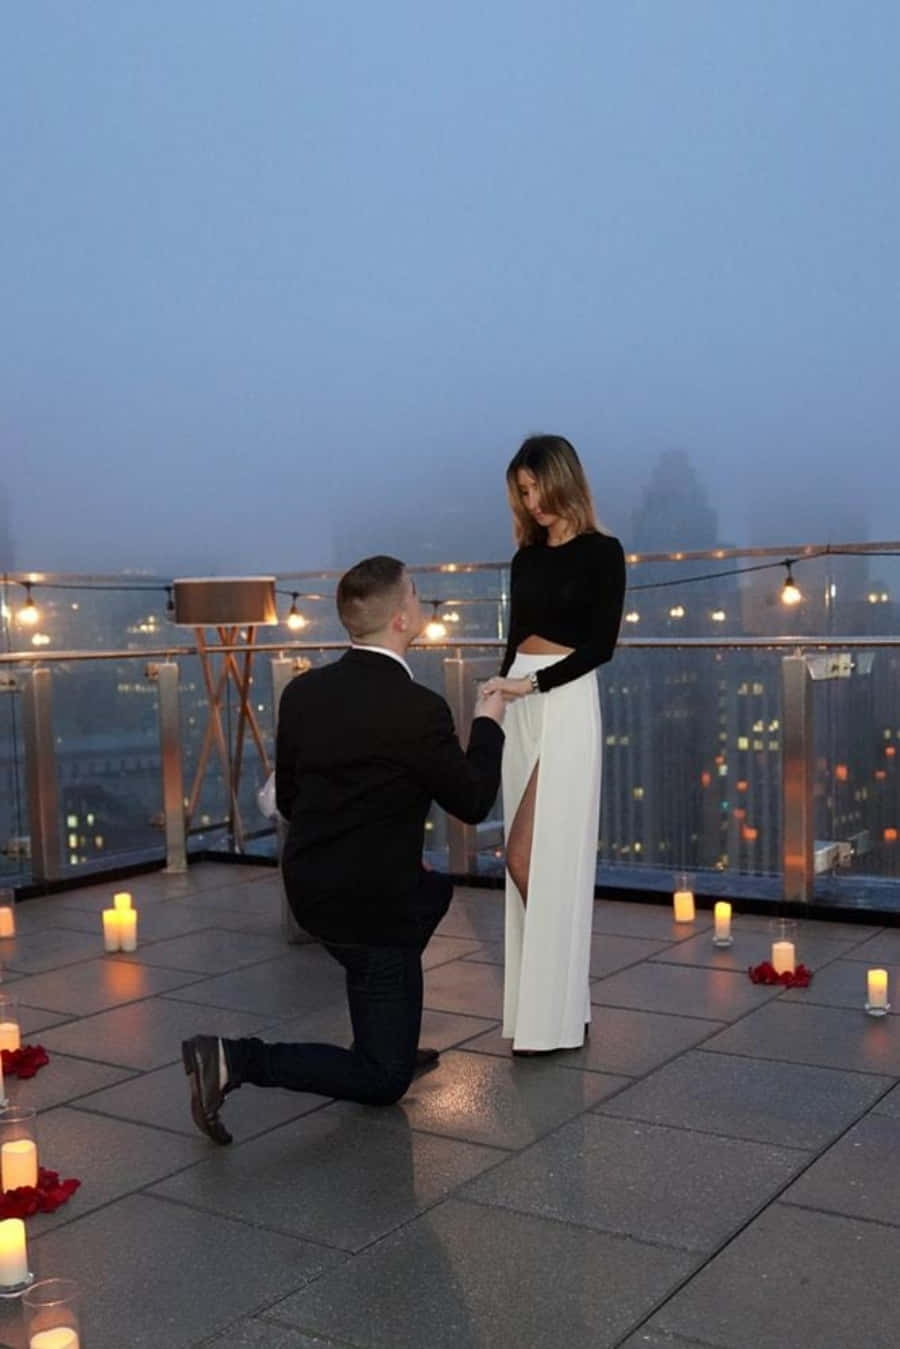 “The Moment of a Romantic Proposal”